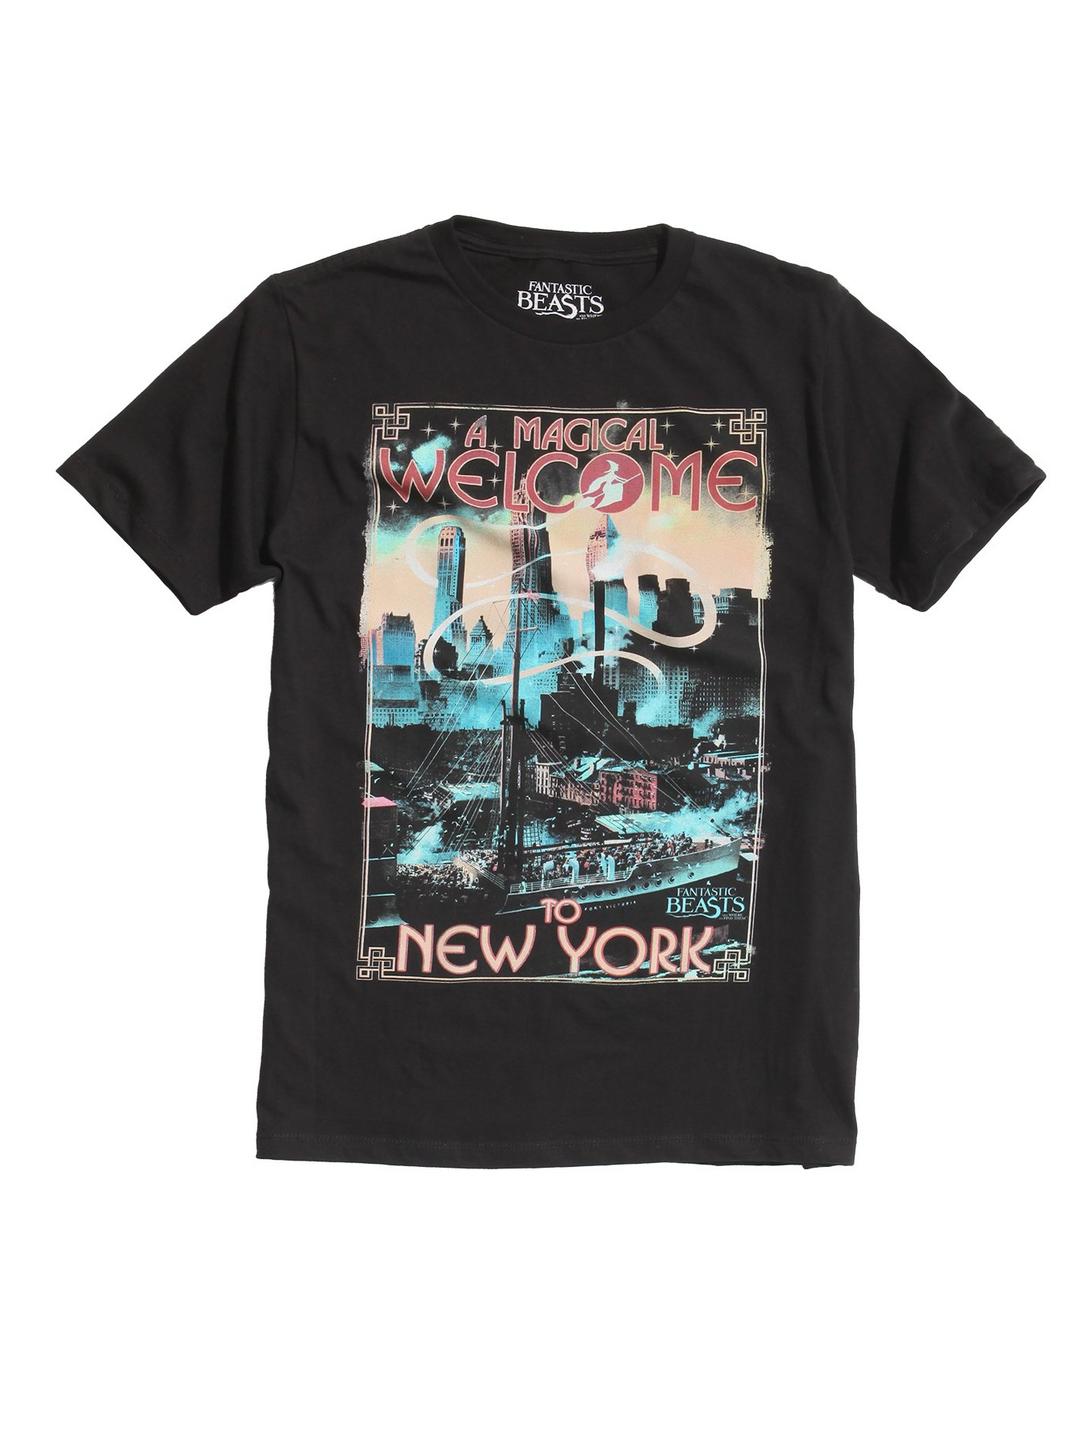 Fantastic Beasts And Where To Find Them Welcome To New York T-Shirt, BLACK, hi-res